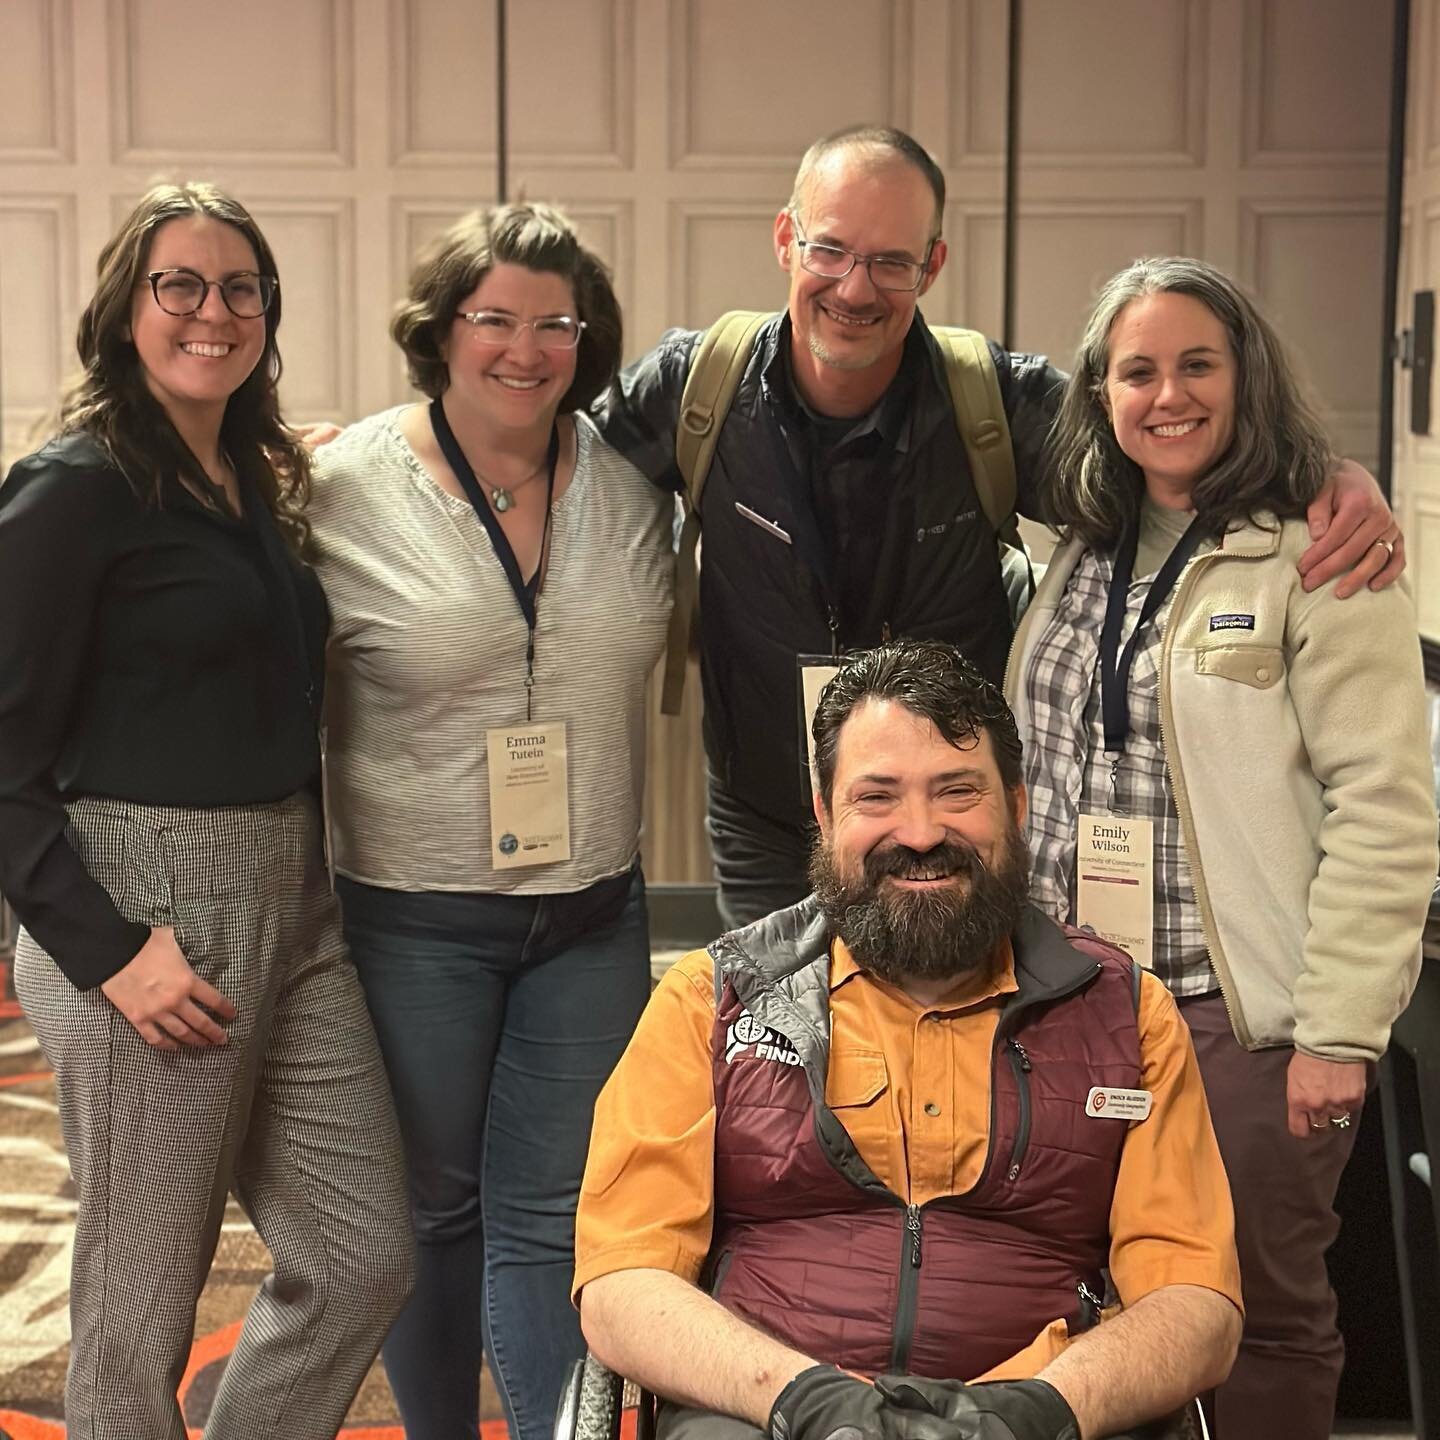 Amazing to have NV, NH, VT, CT, and ME Trail Finder maintainers all in the same room sharing experiences about the work of connecting people to trails and outdoor experiences!